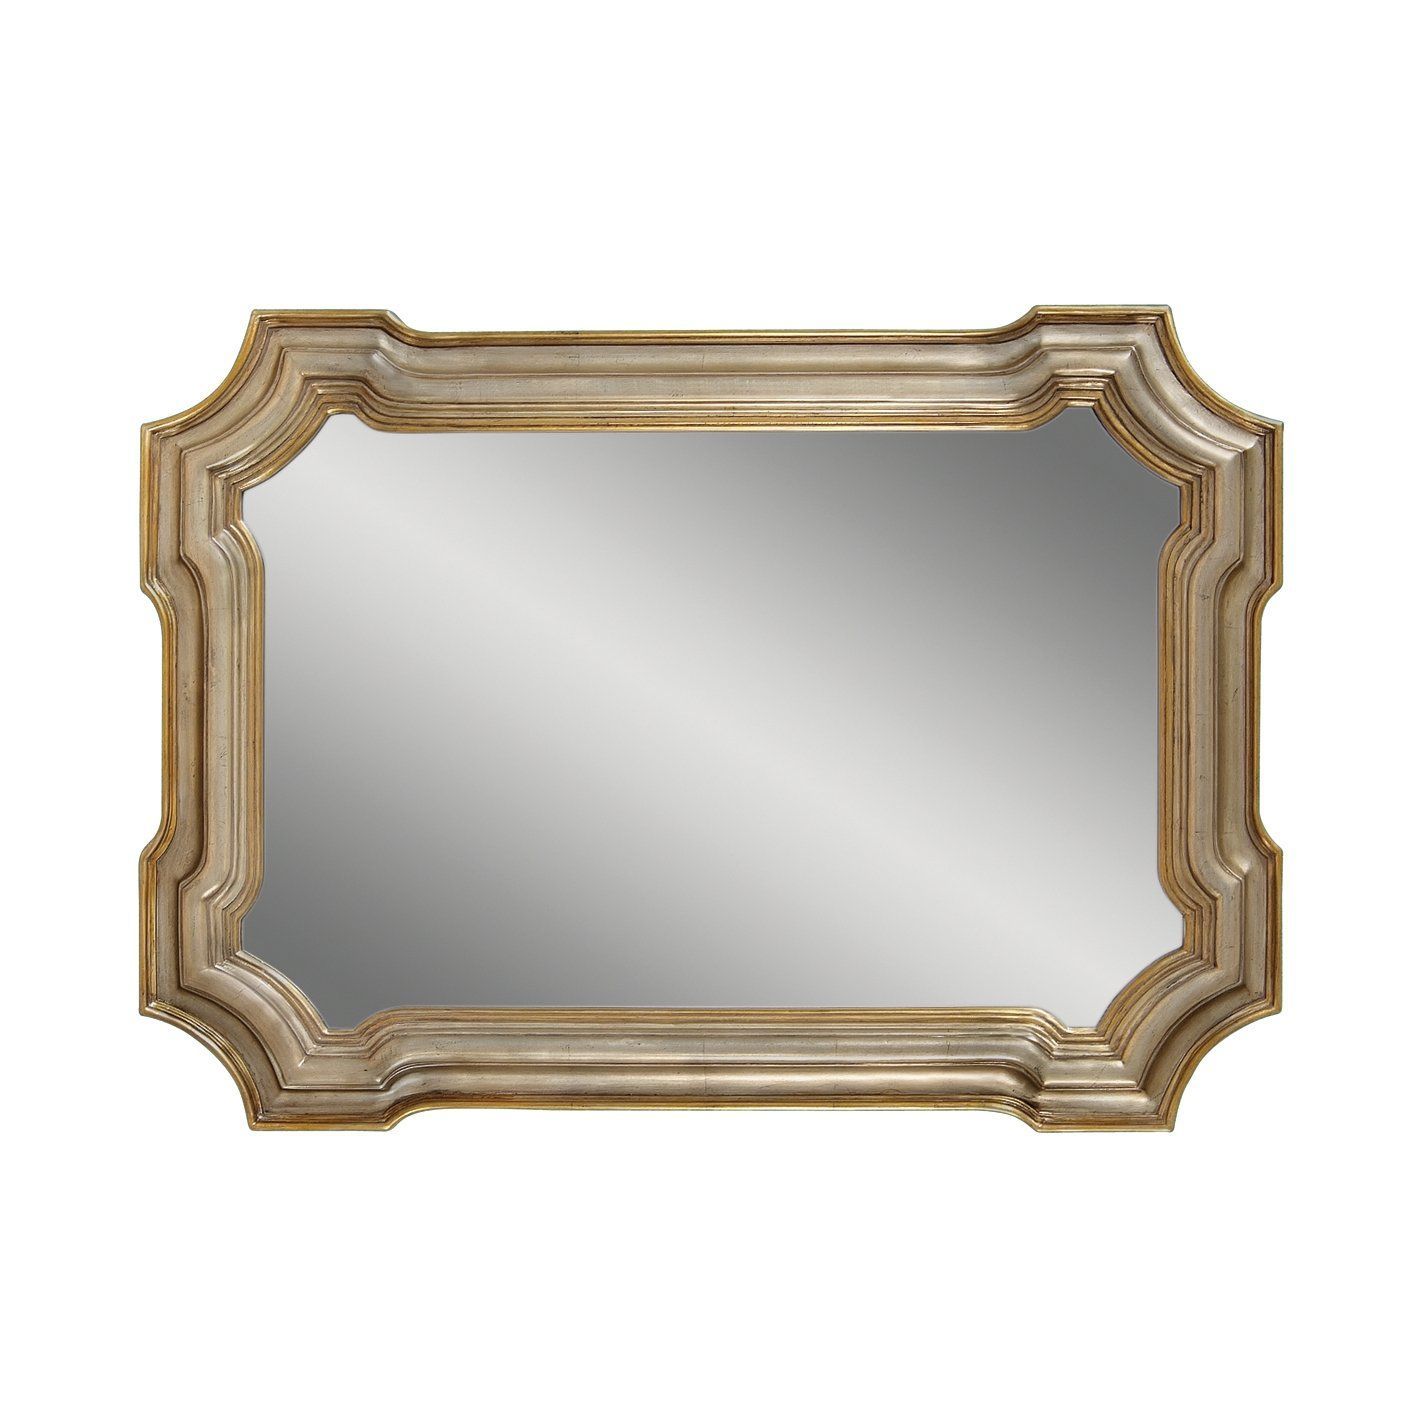 Bassett Mirror M2804 Gold Silver Leaf Shaped Rectangle Decorative Pertaining To Gold Leaf Floor Mirrors (View 2 of 15)